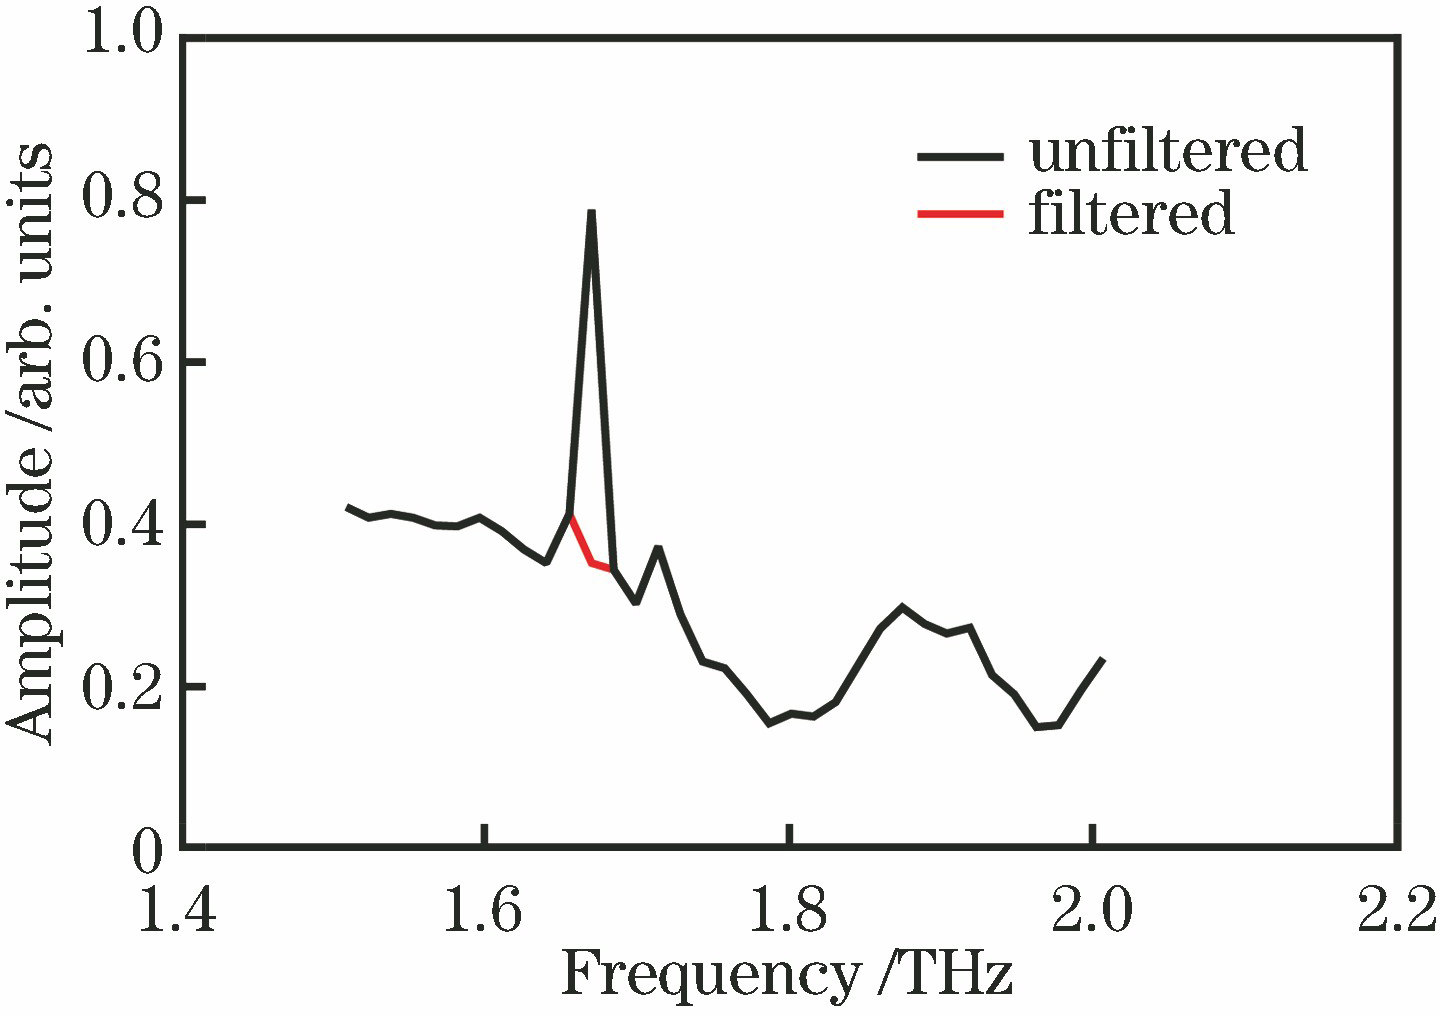 Comparison of abnormal data of transmission coefficient before and after filtering